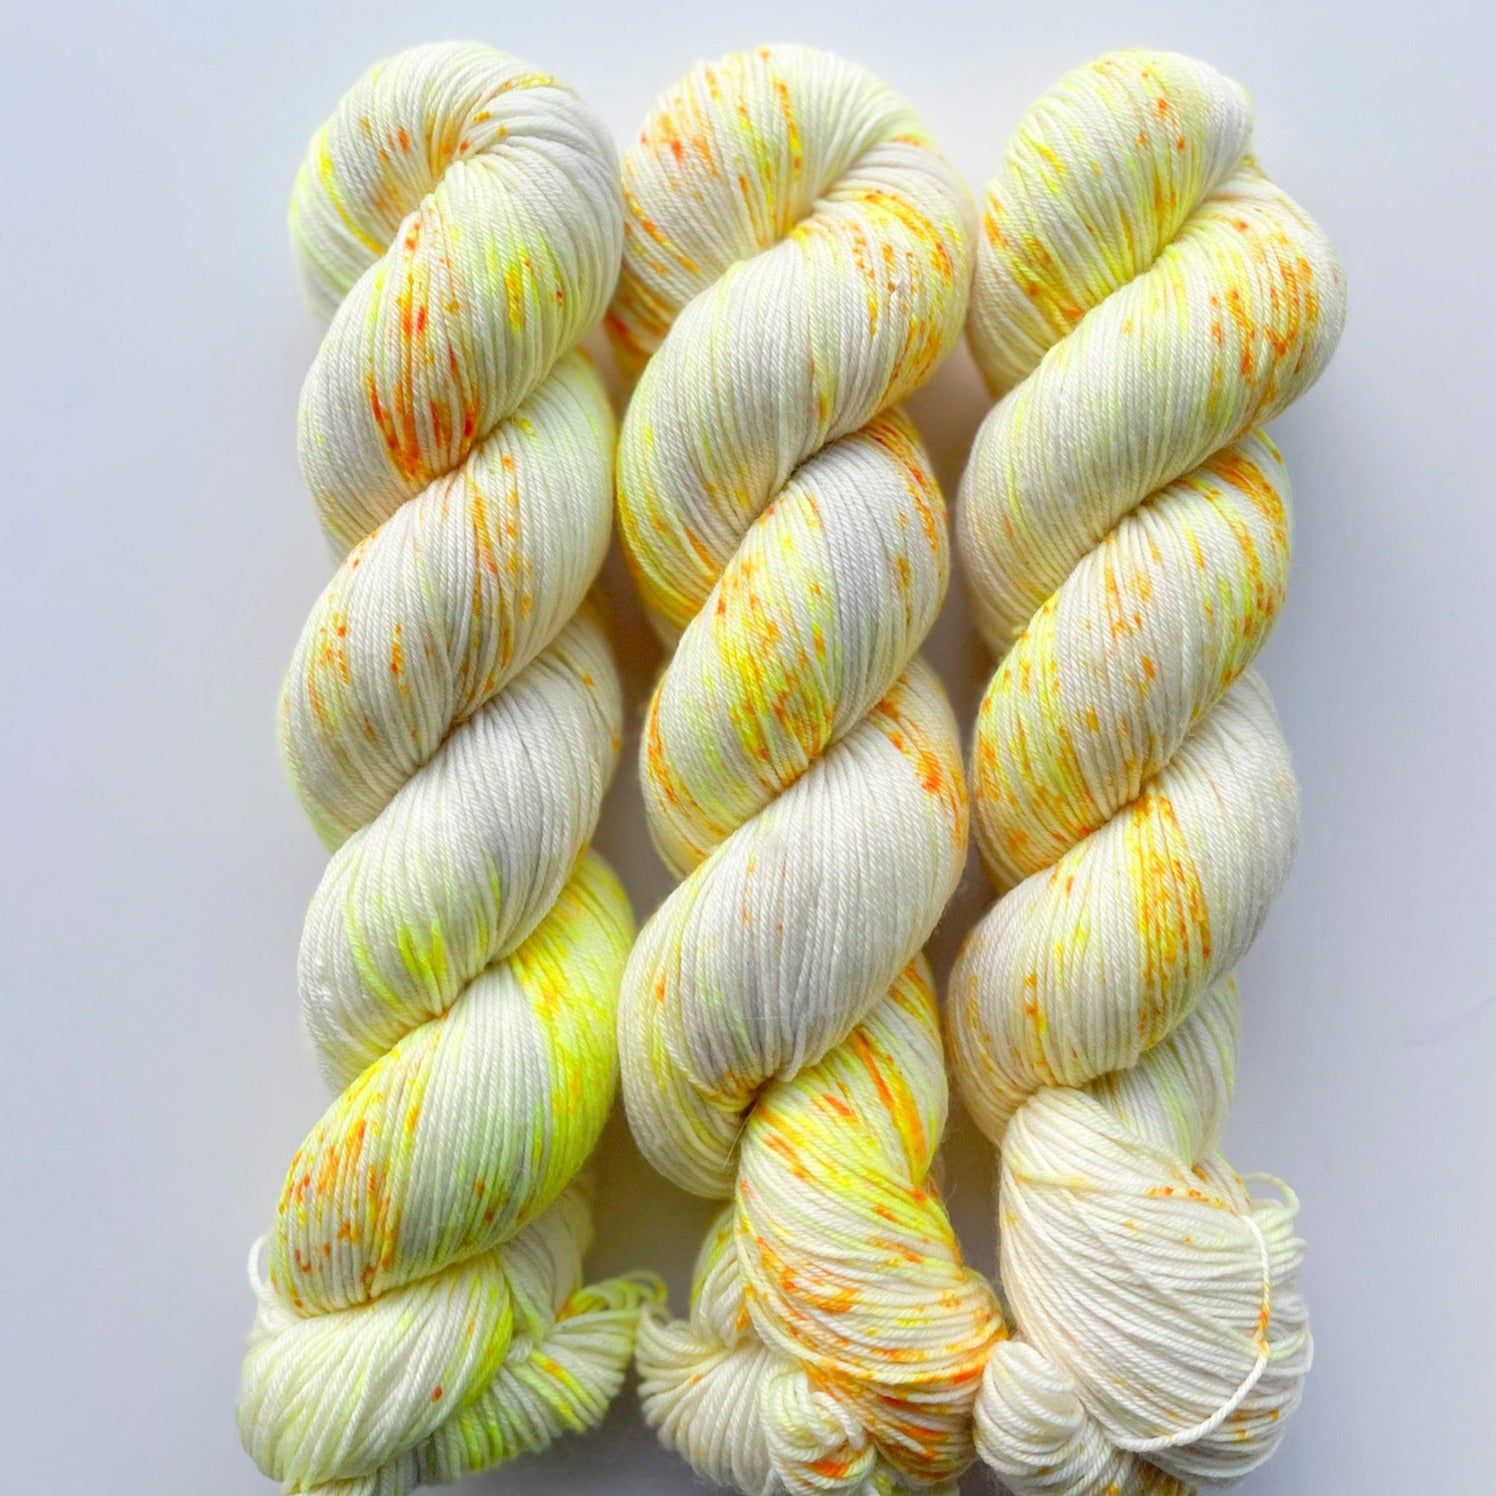 Fearless Fibers Discontinued and Vintage Handdyed Fingering Yarn